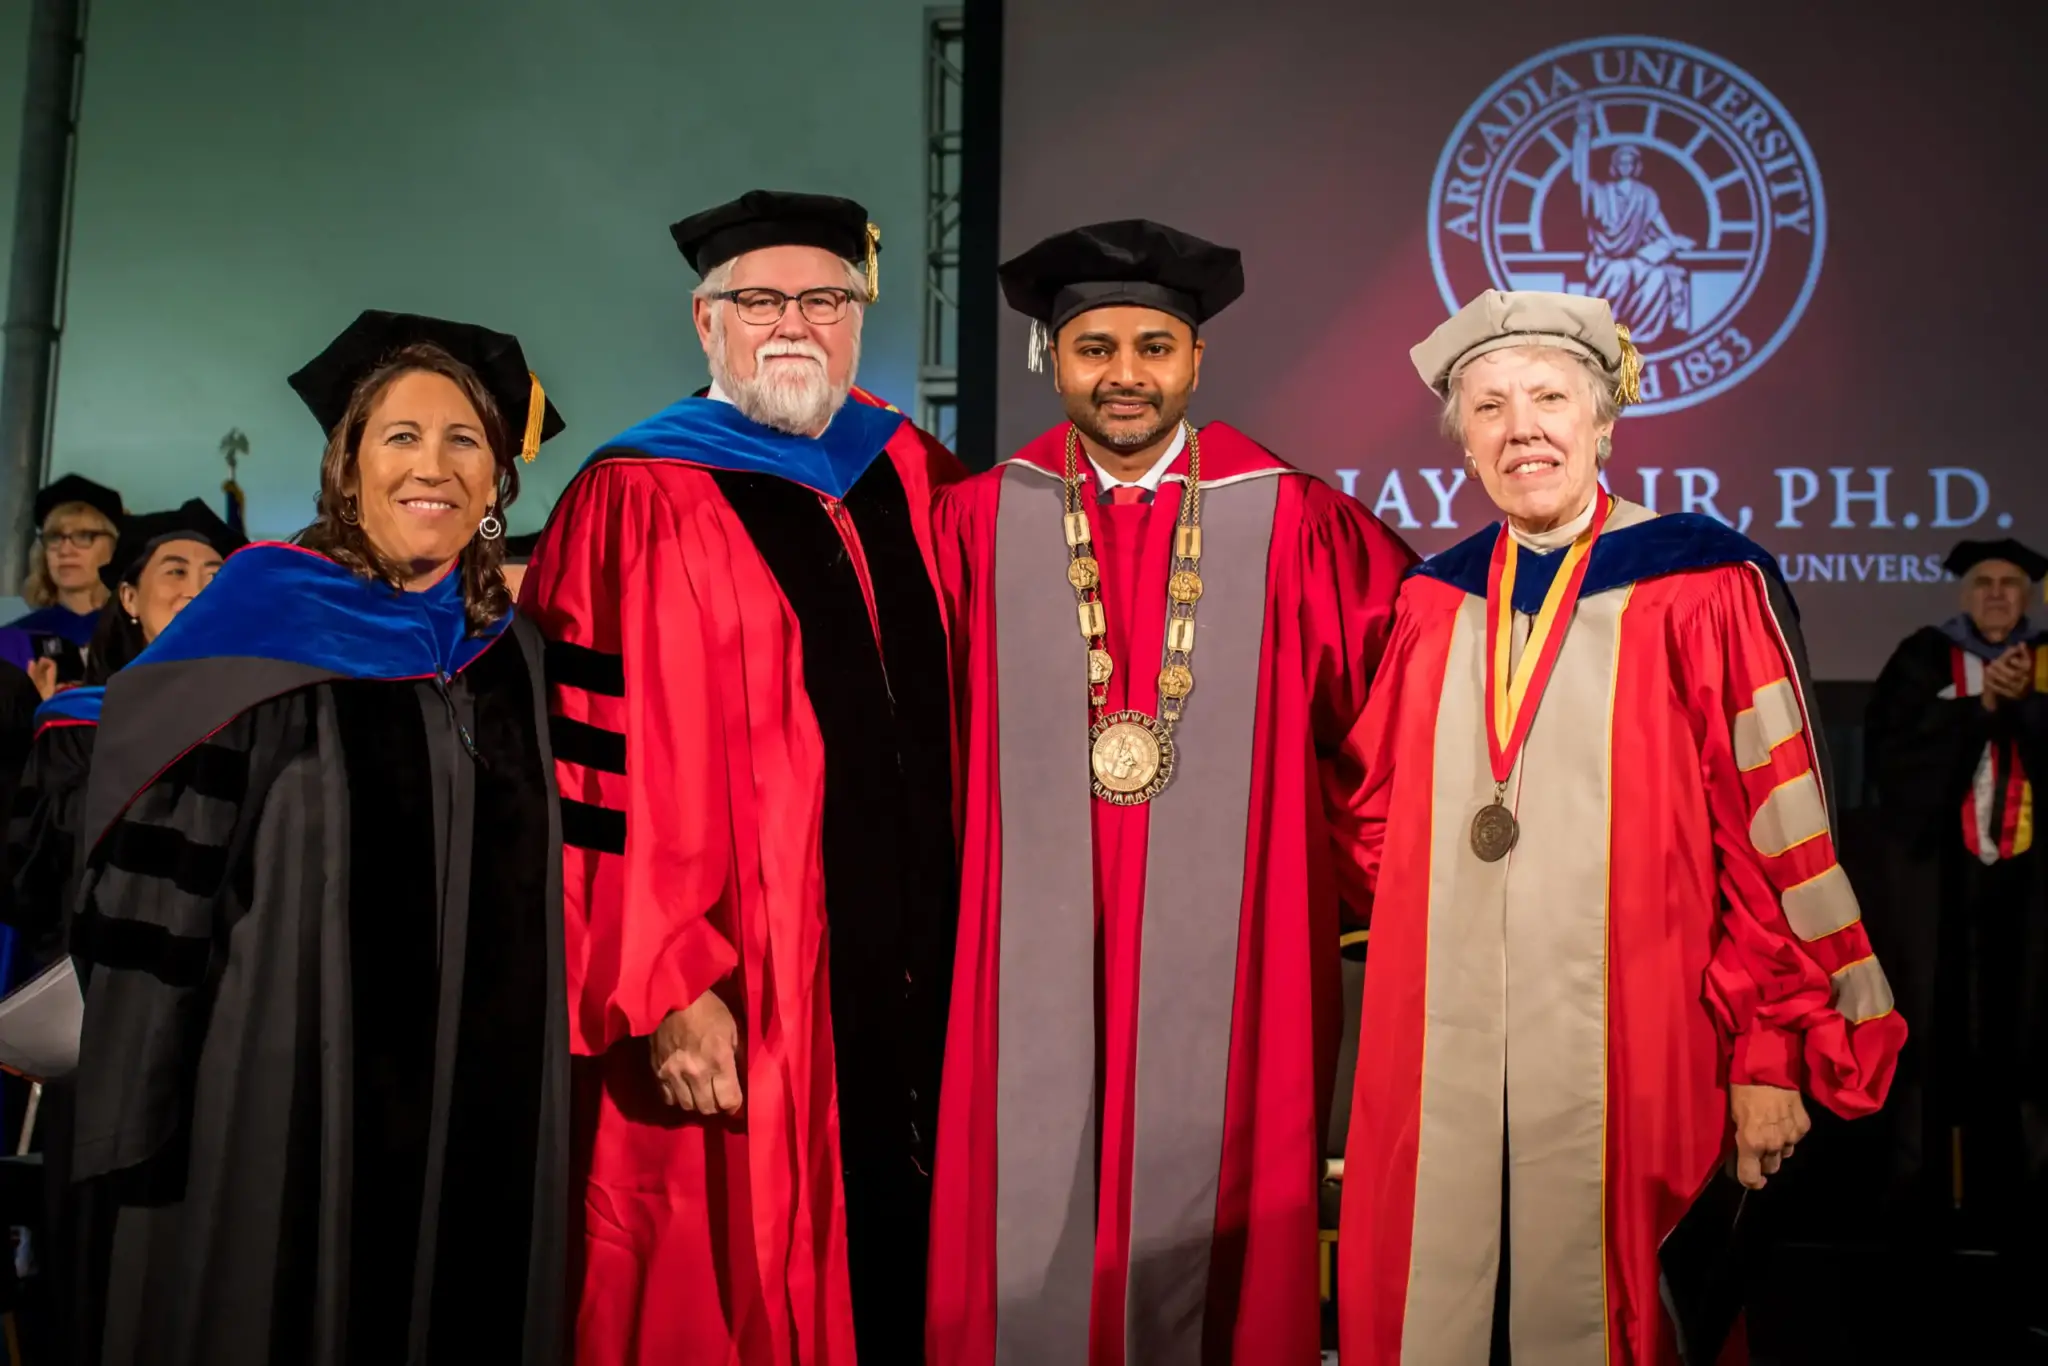 President Ajay Nair stands with colleagues at inauguration ceremony